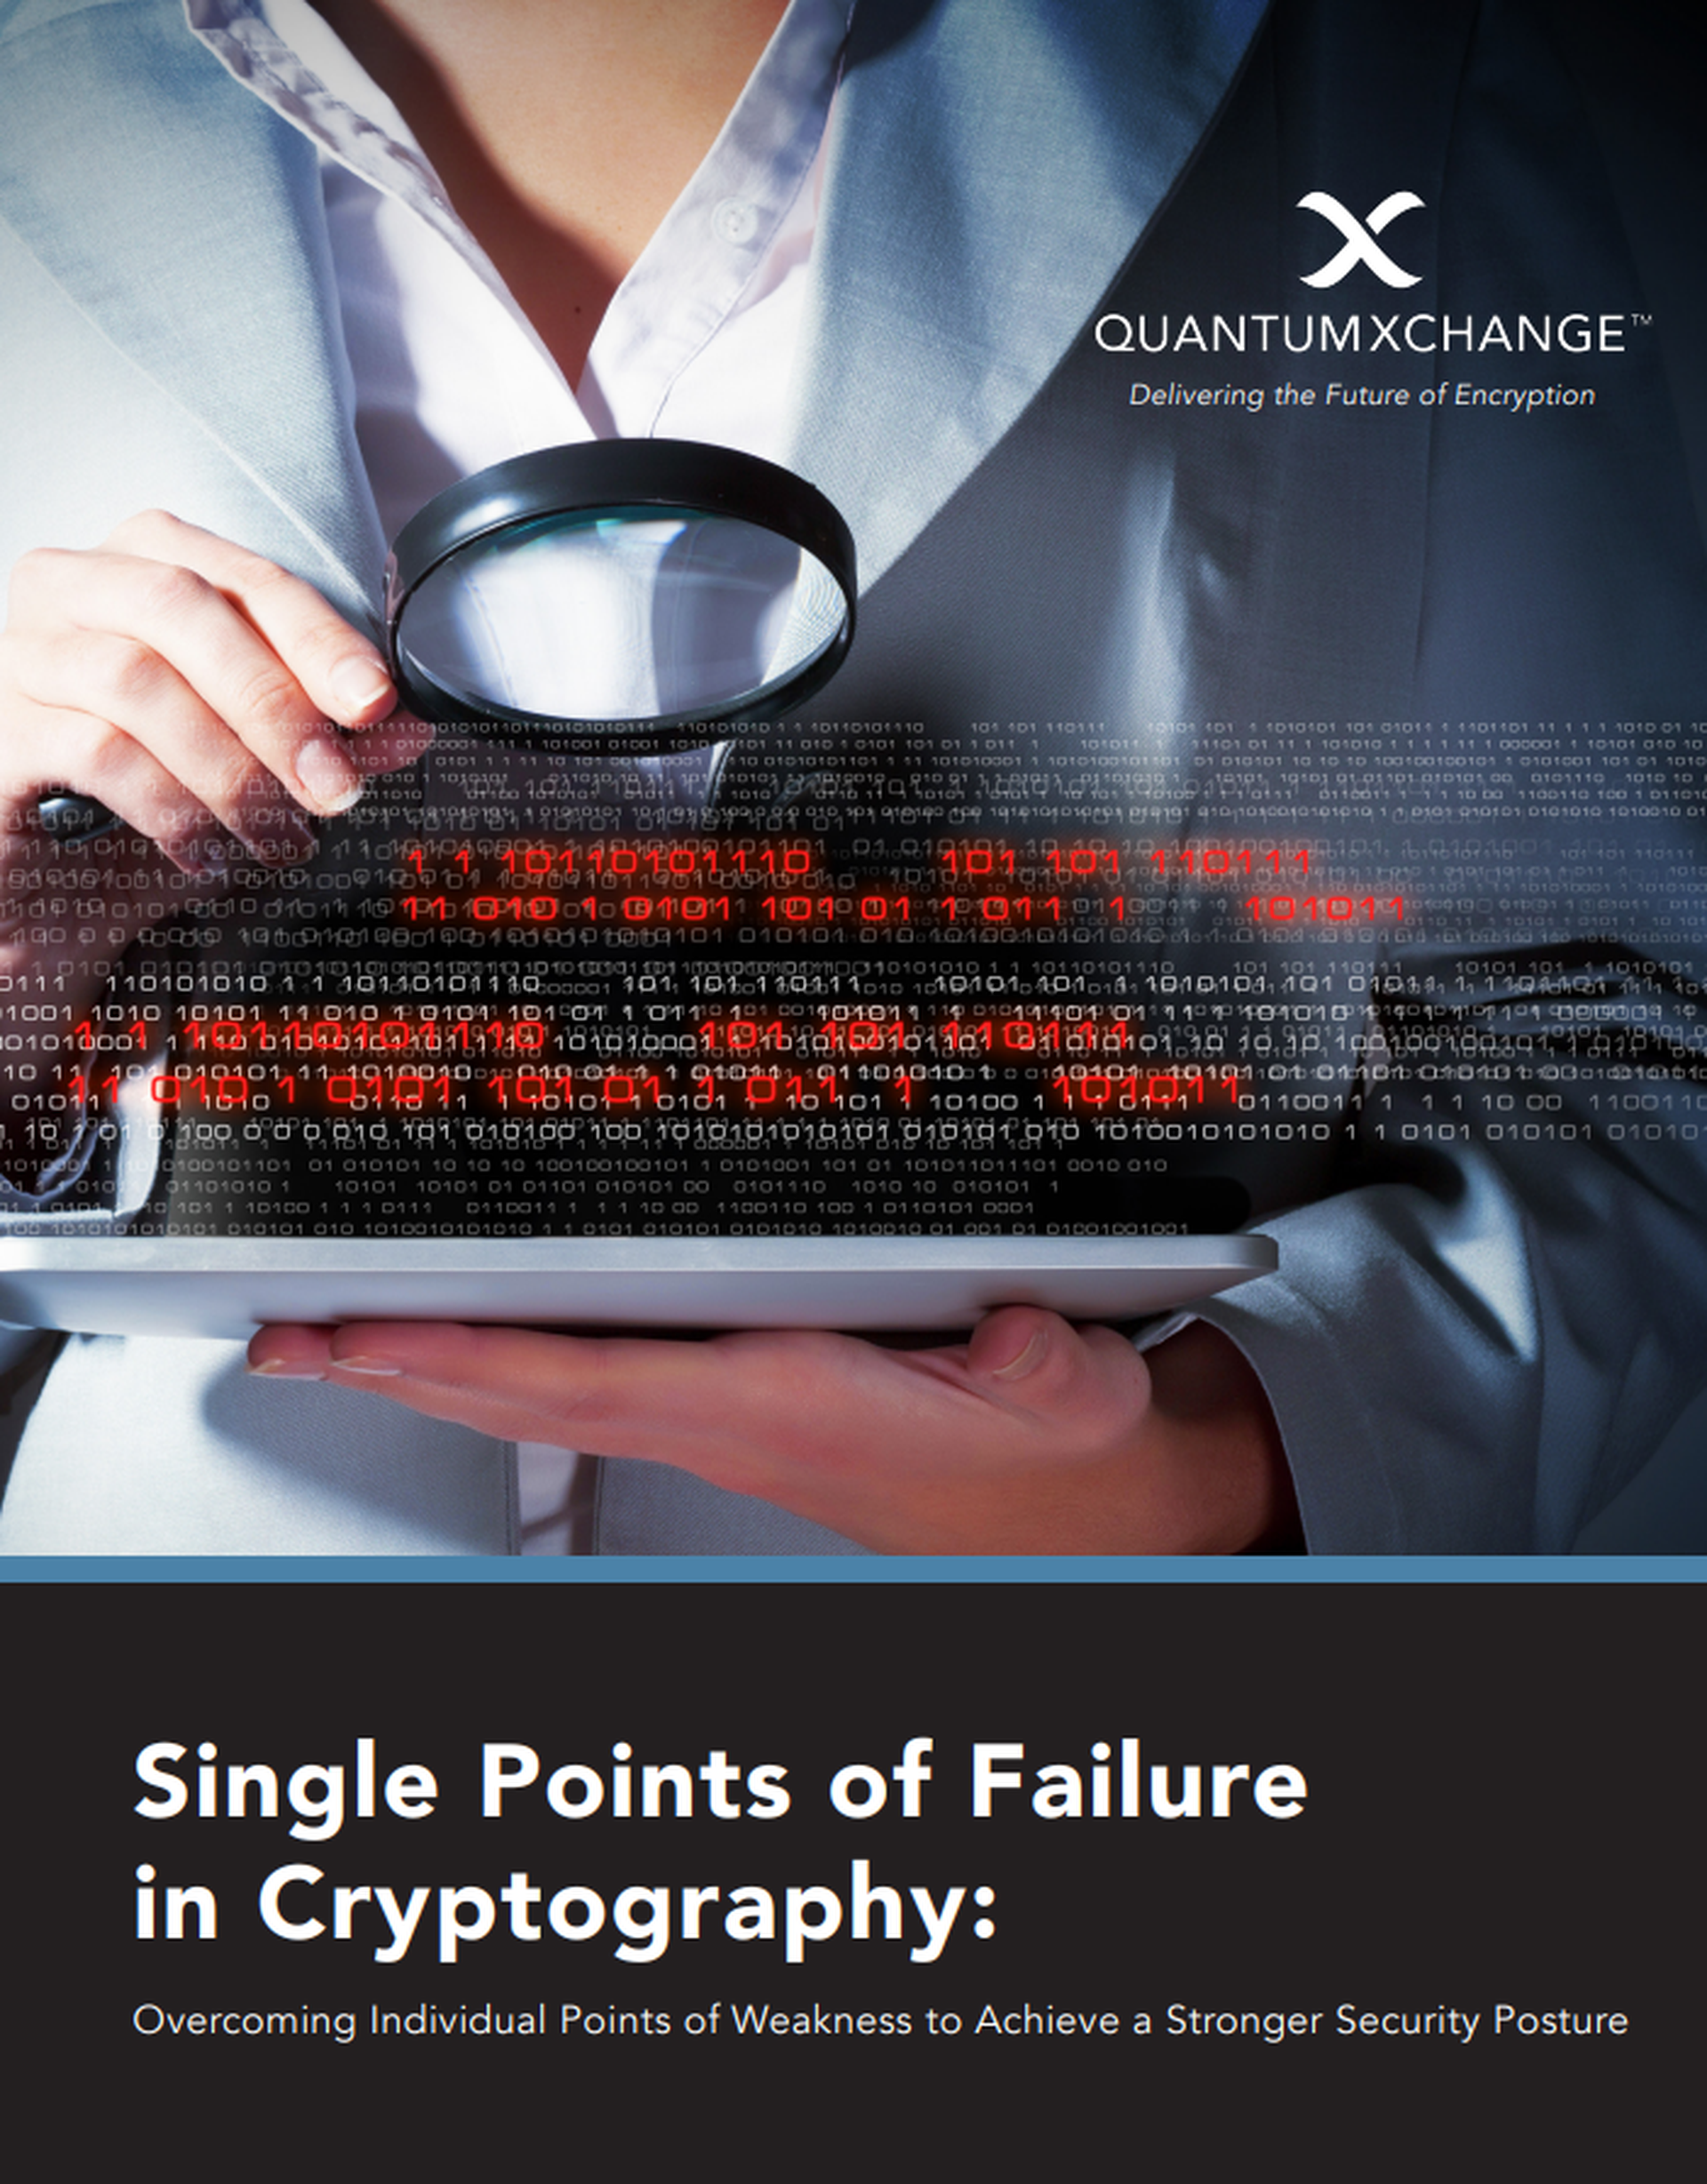 Addressing Single Points of Failure in Cryptography: Why it Matters